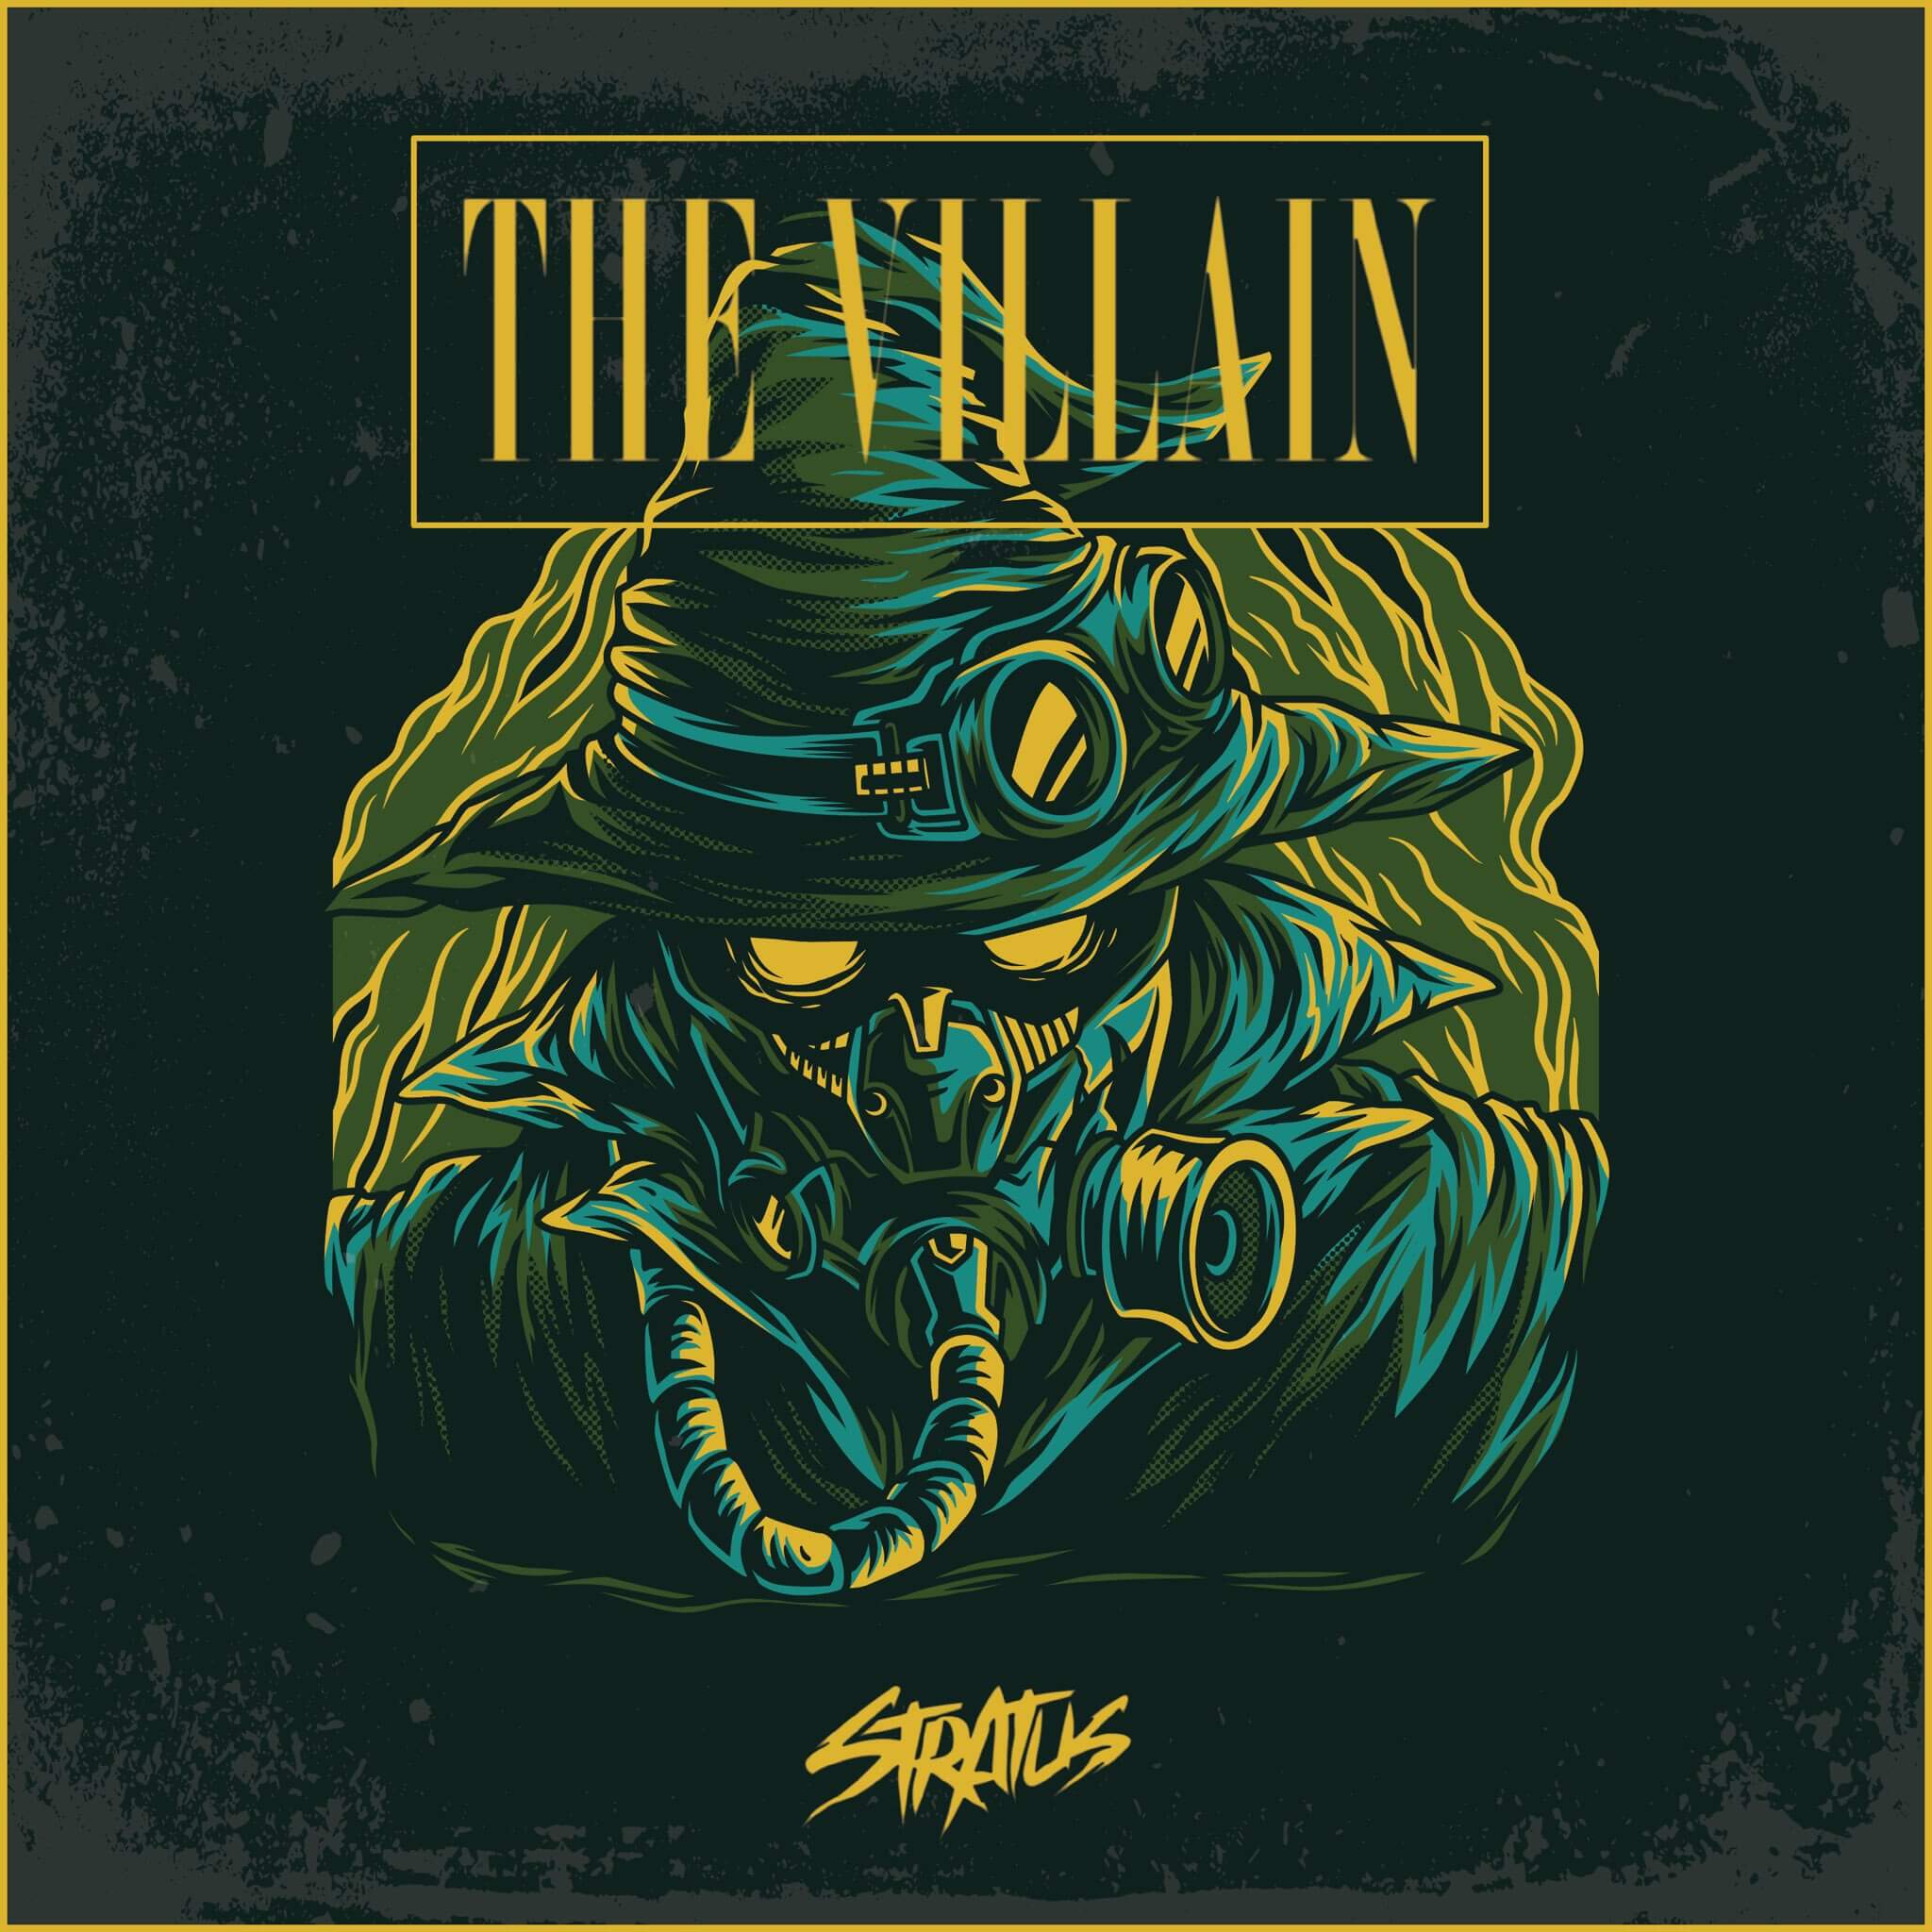 Stratus Brings Out Evil Side with New Single, “The Villain”